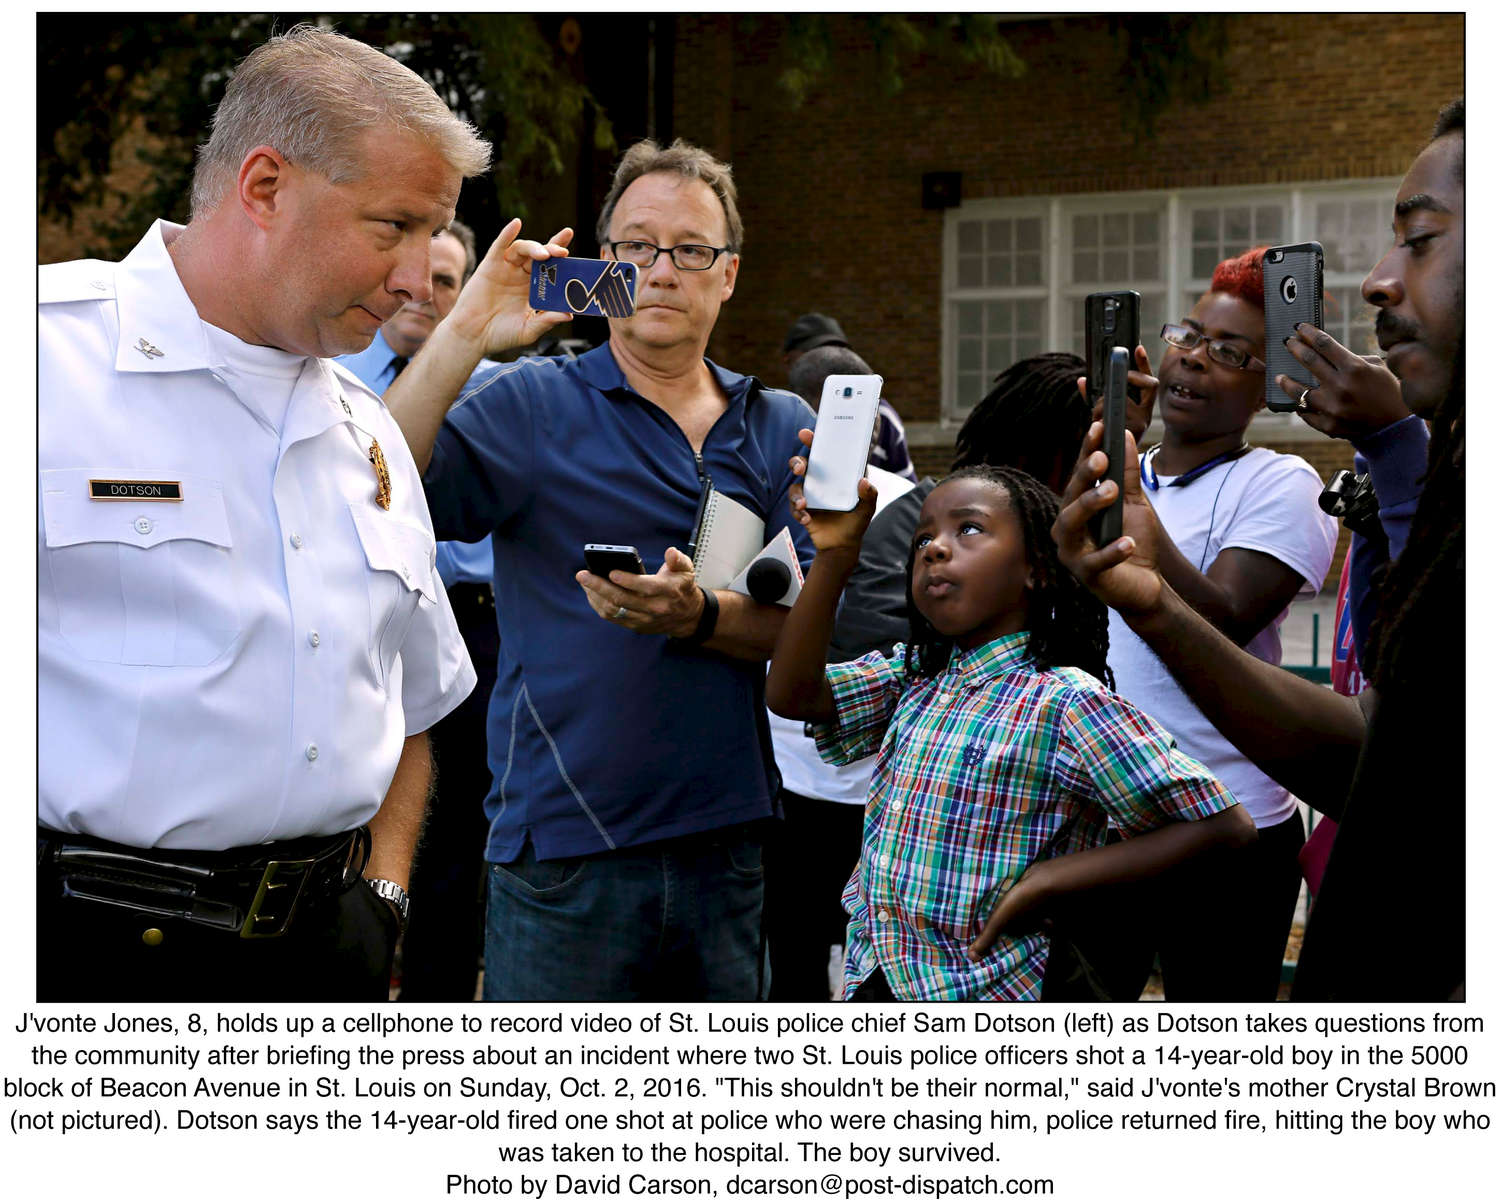 J'vonte Jones, 8, holds up a cellphone to record video of St. Louis police chief Sam Dotson (left) as Dotson takes questions from the community after briefing the press about an incident where two St. Louis police officers shot a 14-year-old boy in the 5000 block of Beacon Avenue in St. Louis on Sunday, Oct. 2, 2016. {quote}This shouldn't be their normal,{quote} said J'vonte's mother Crystal Brown (not pictured). Dotson says the 14-year-old fired one shot at police who were chasing him, police returned fire, hitting the boy who was taken to the hospital. The boy survived.Photo by David Carson, dcarson@post-dispatch.com